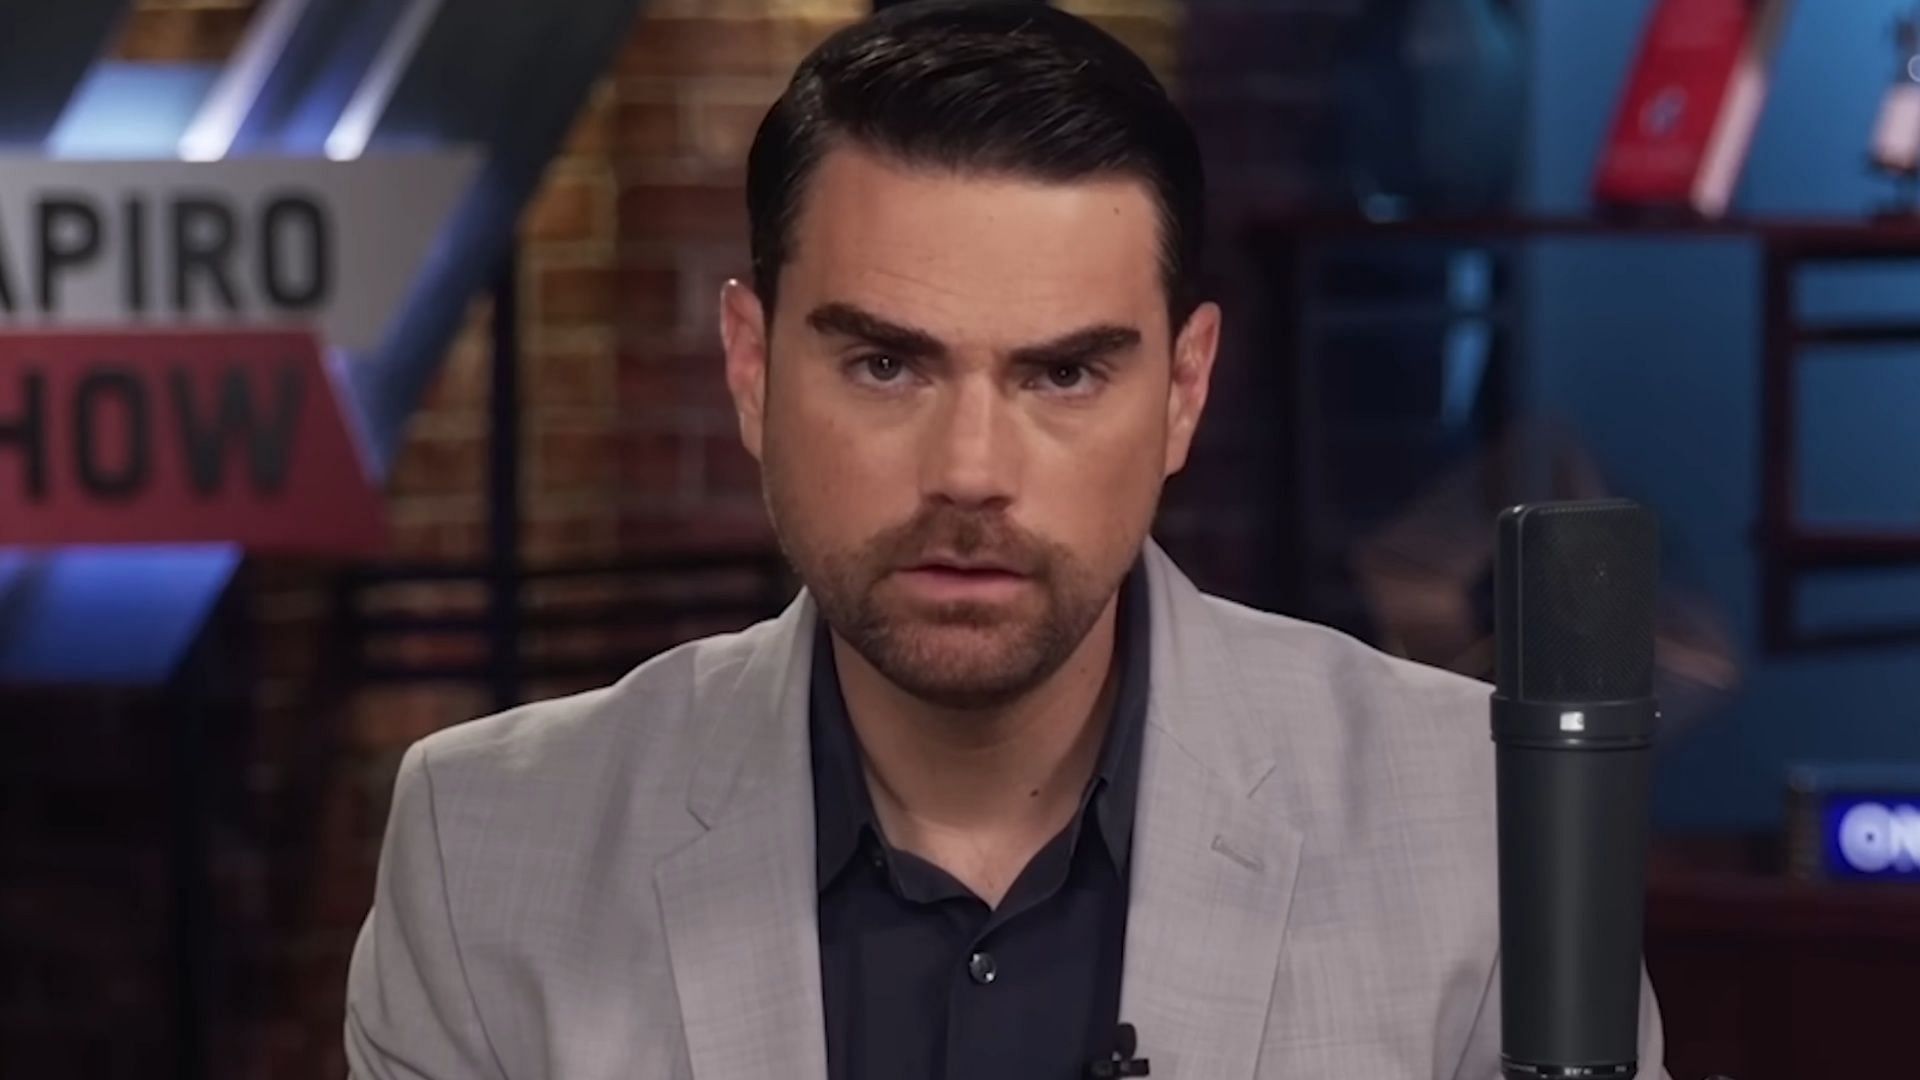 Ben Shapiro shares images of dead baby